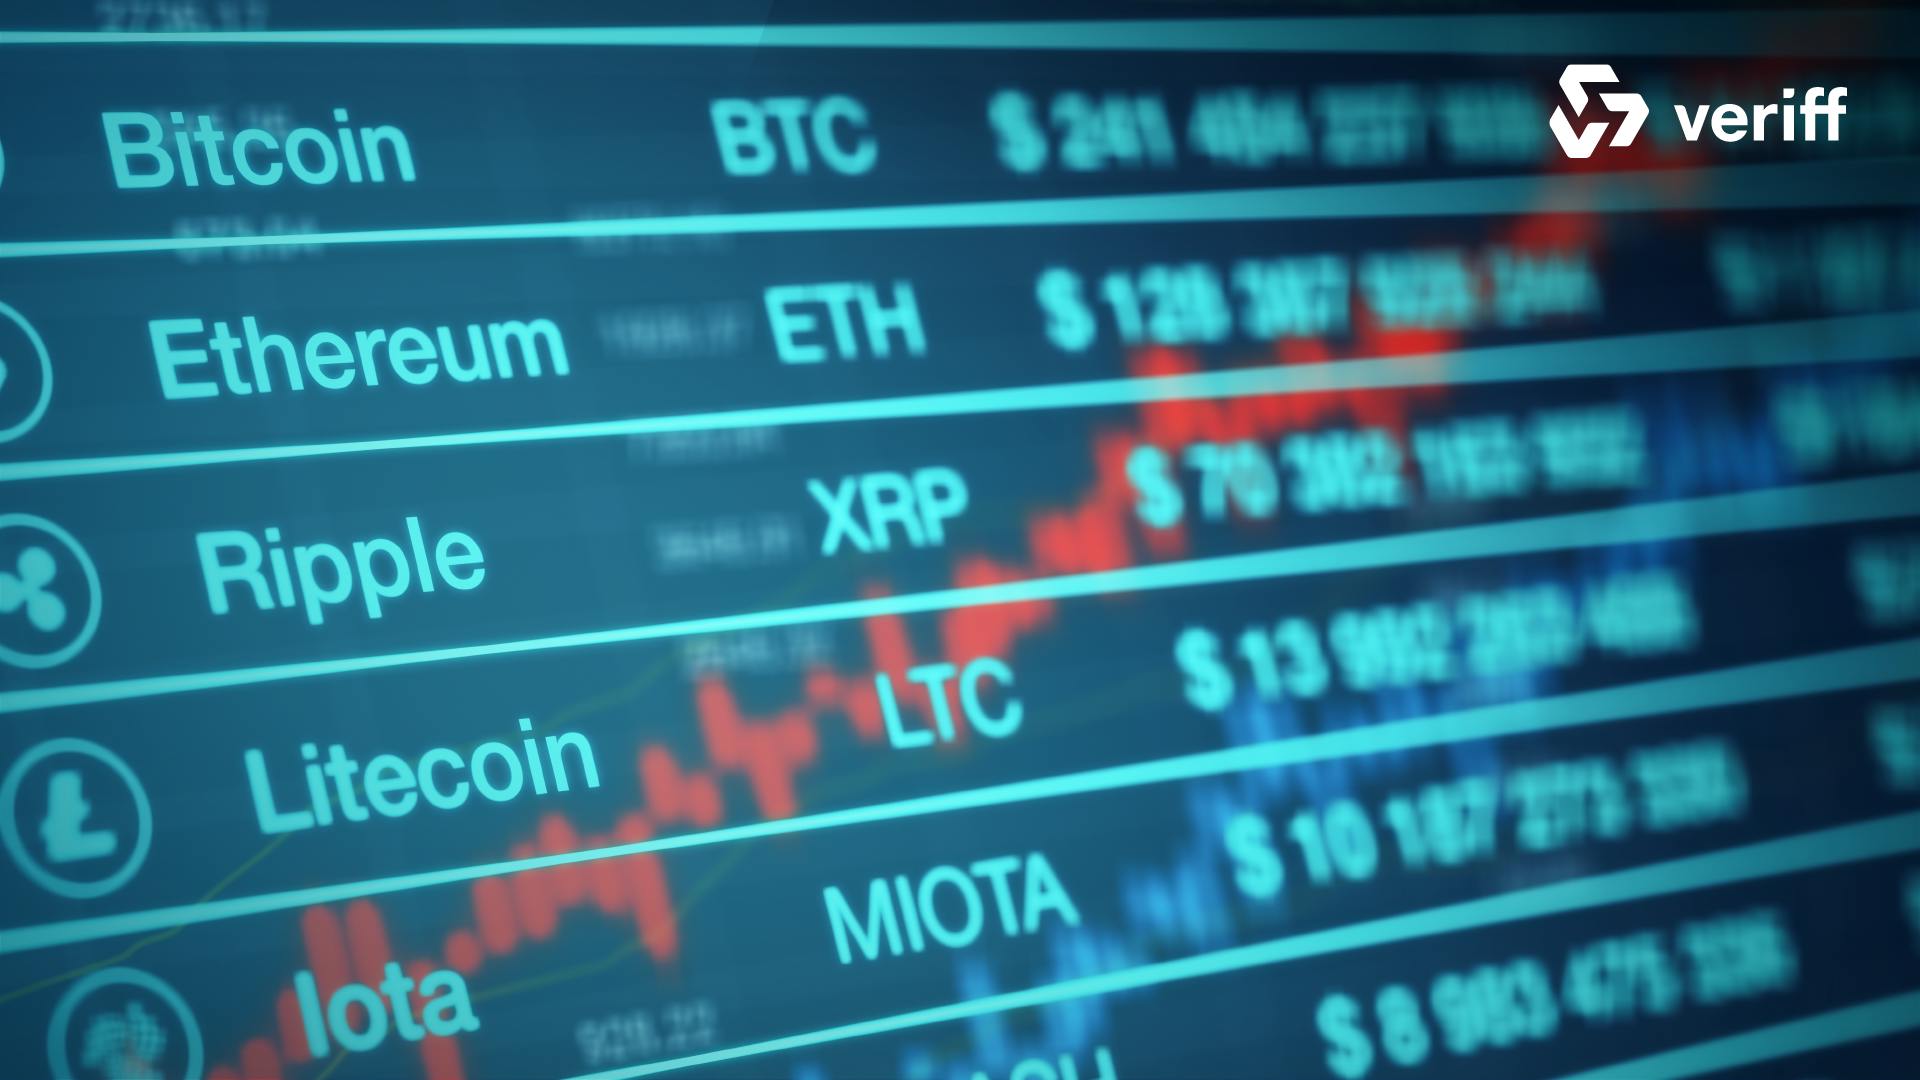 Best Low Market Cap Cryptocurrency : Top Cryptocurrencies To Buy In 2021 4 To Watch Right Now Nasdaq : These top crypto exchanges offers high volume, trust and are safe to use.